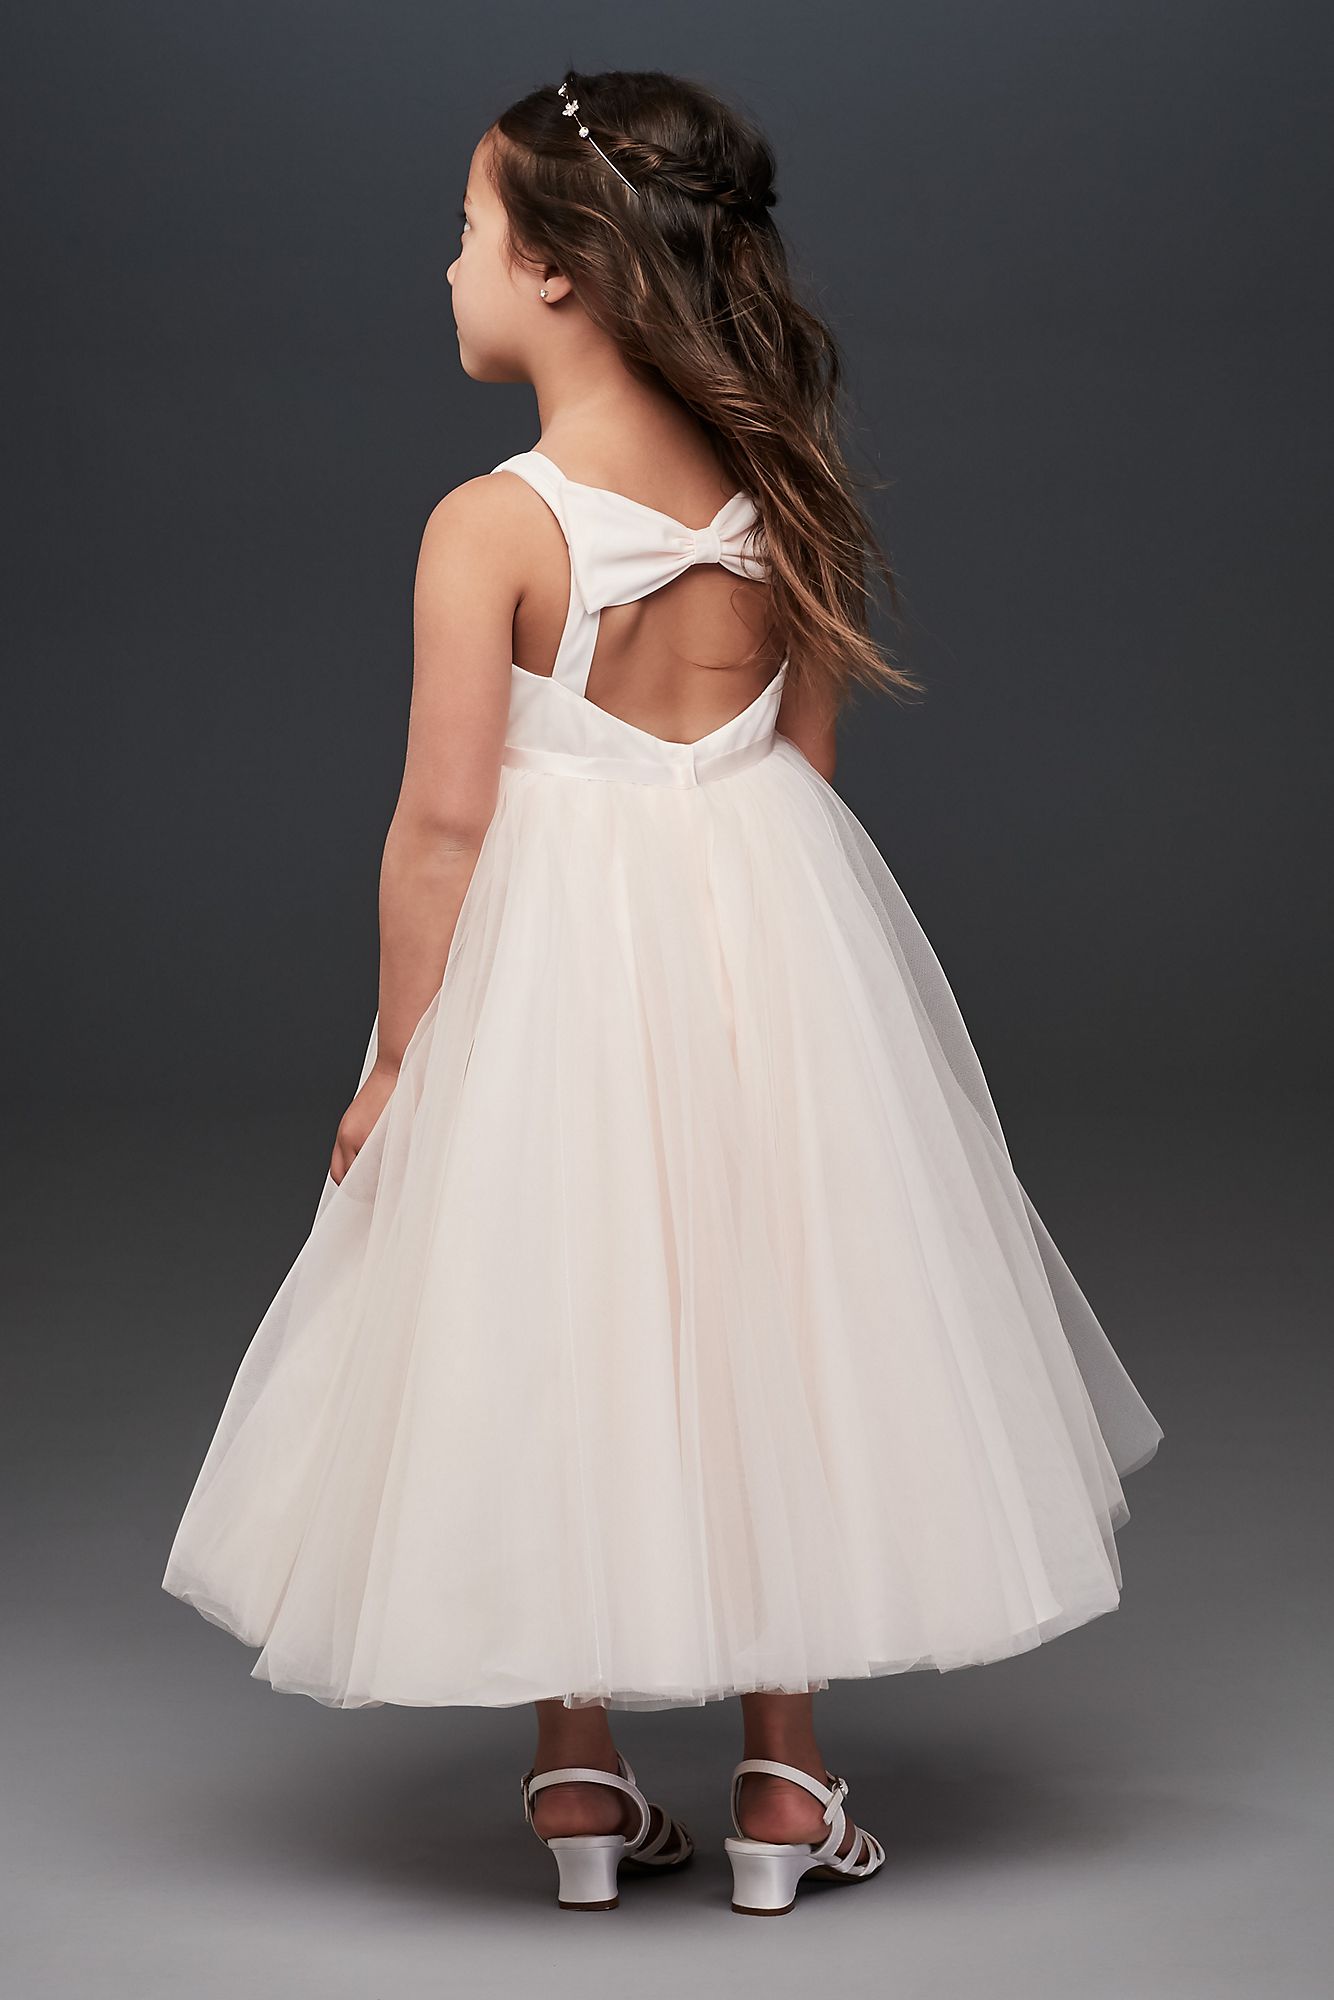 Tank Sleeveless Pleated CR1403 Style Flower Girl Dress with Delicate Back Bow